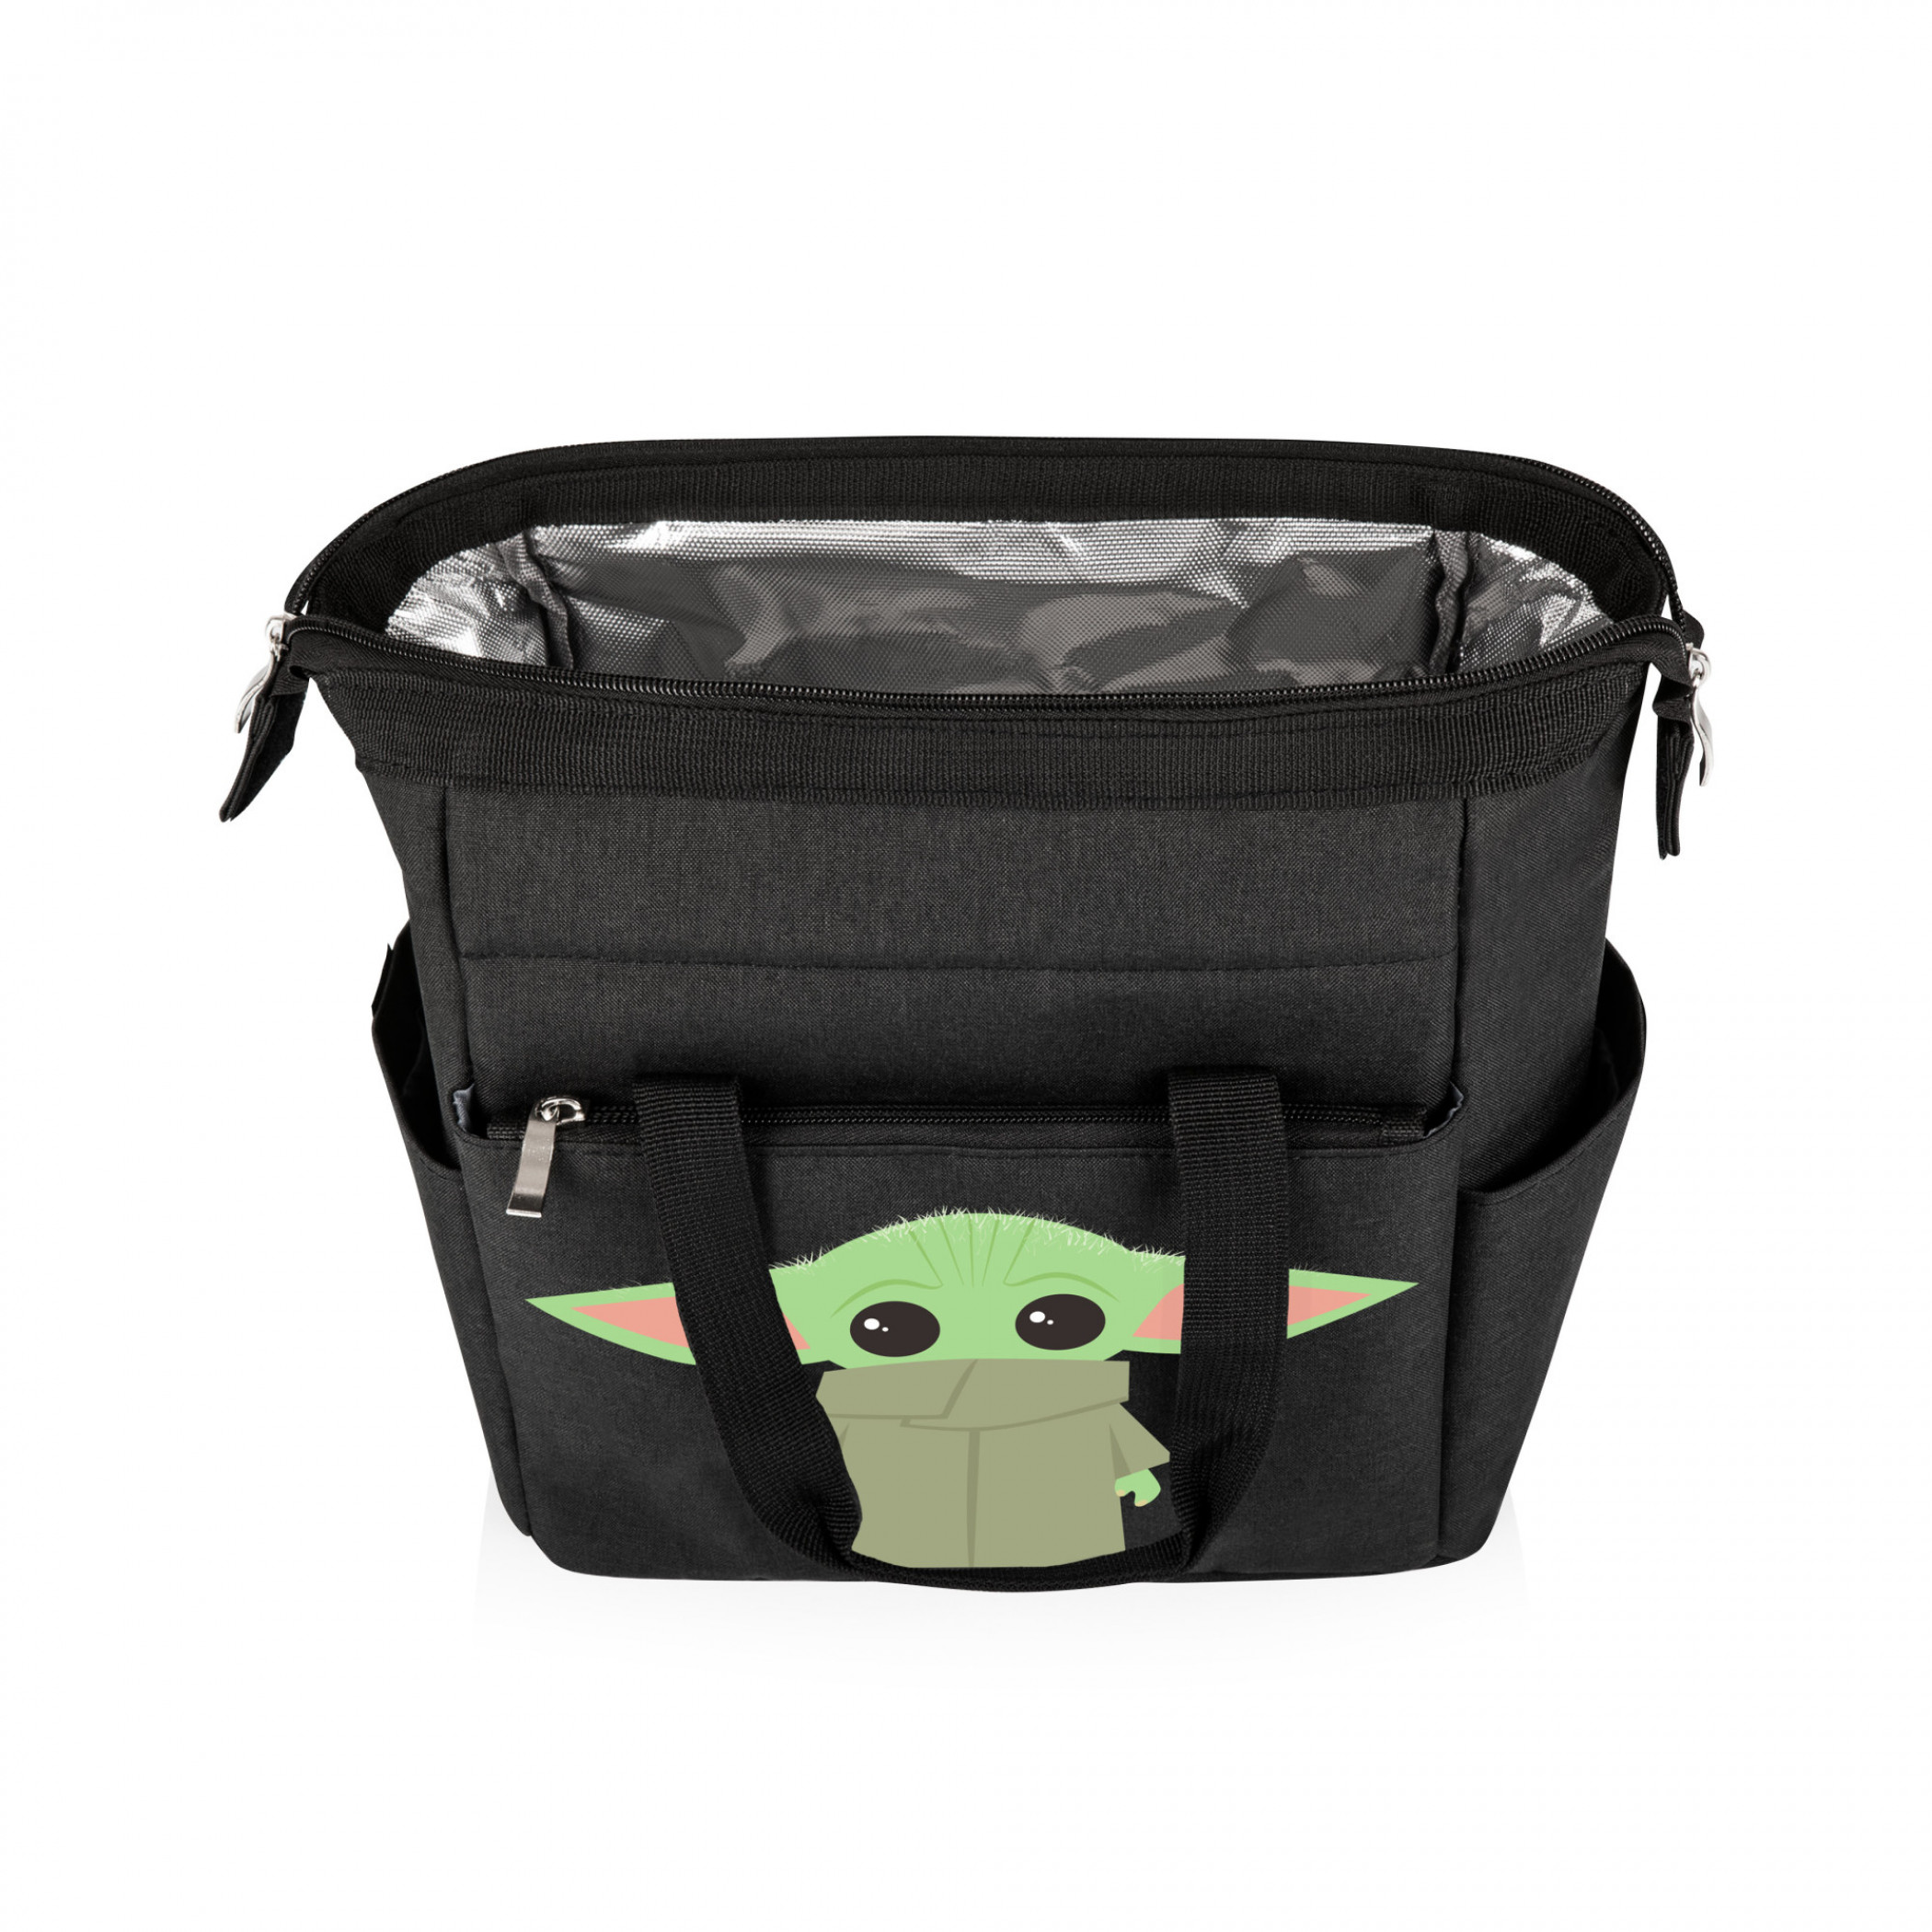 The Mandalorian The Child On The Go Lunch Cooler